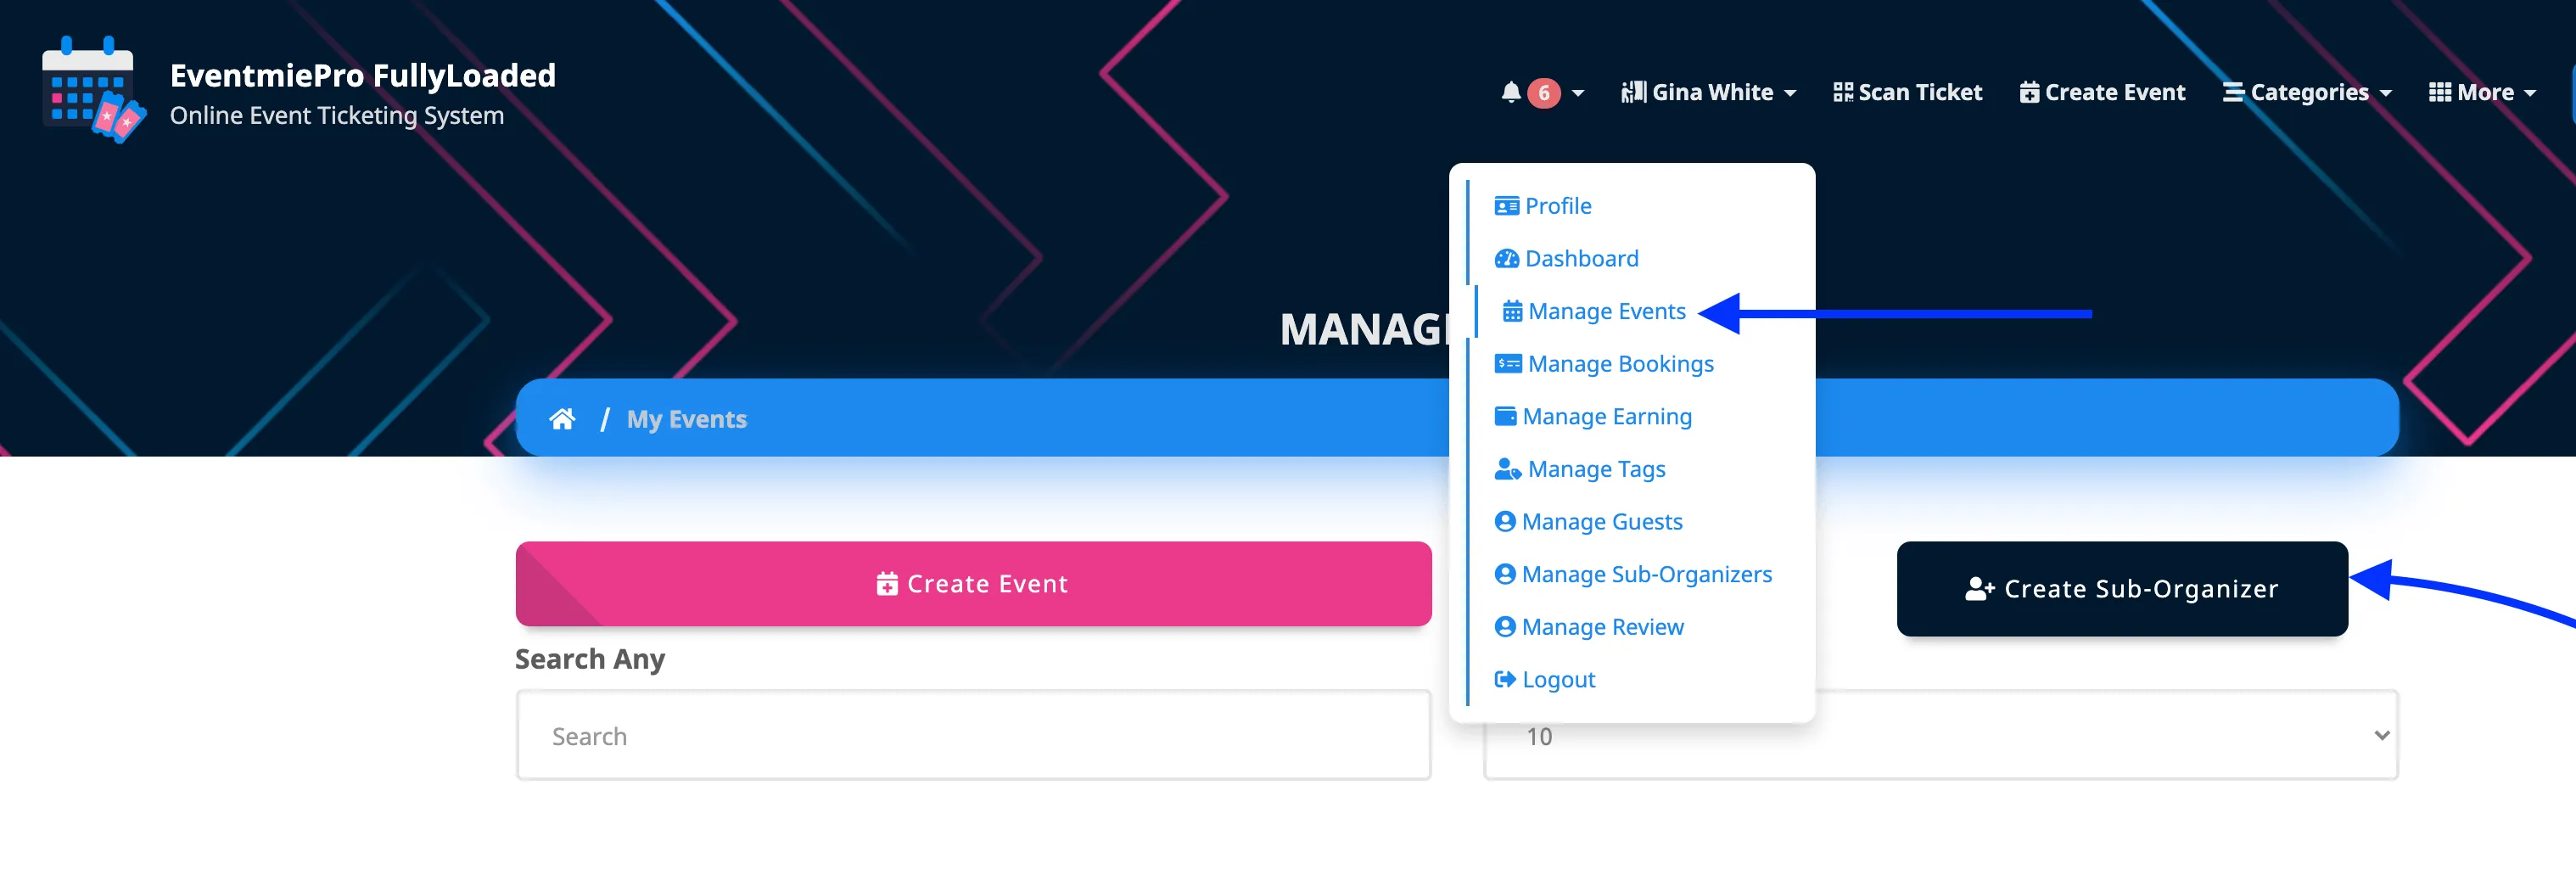 4-organizer-manager-events